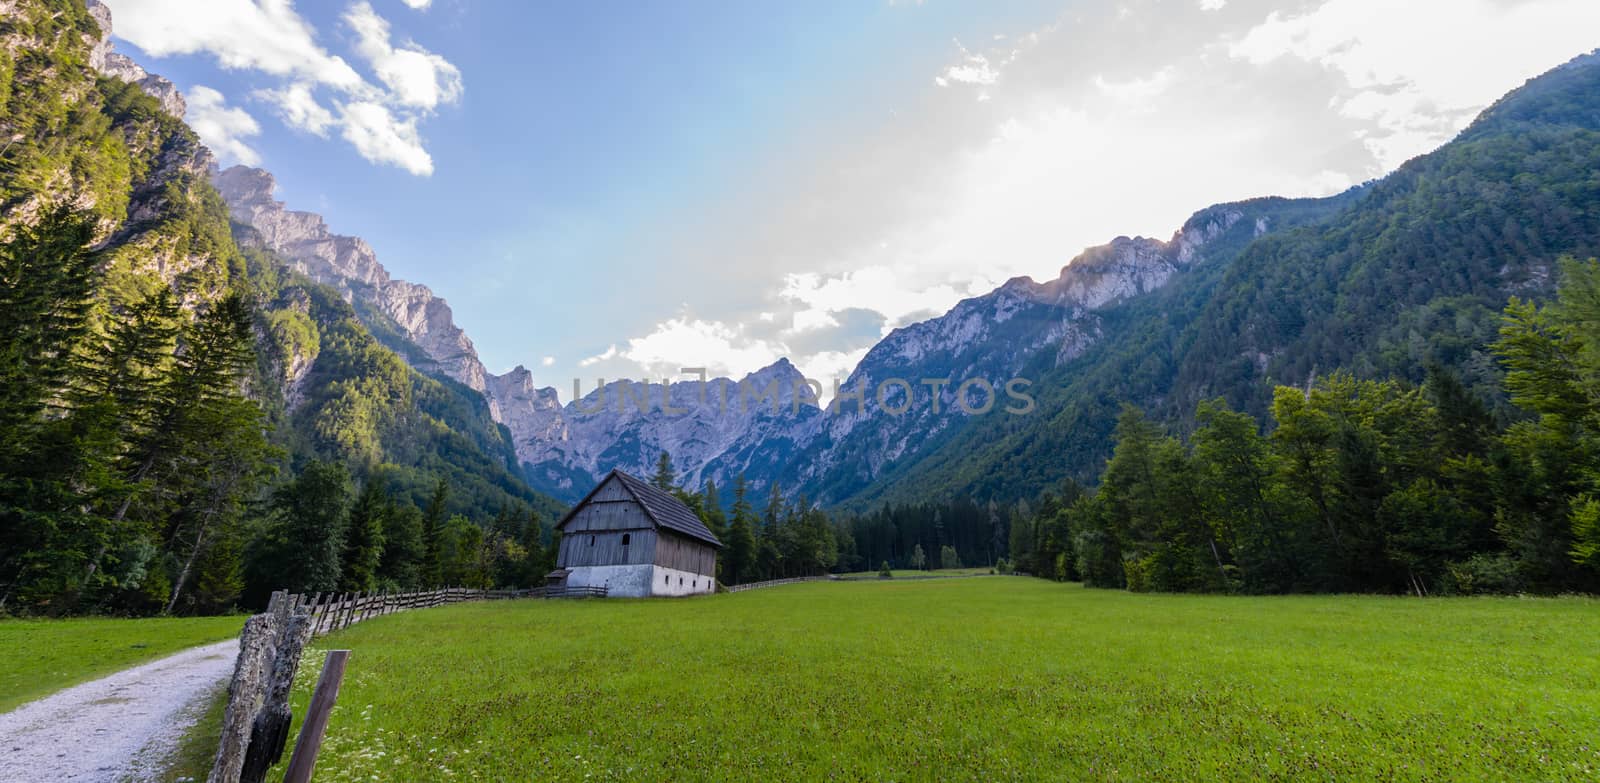 Mountain farm house on meadow in European Alps, located in Robanov kot, Slovenia, popular hiking and climbing place with picturescue view